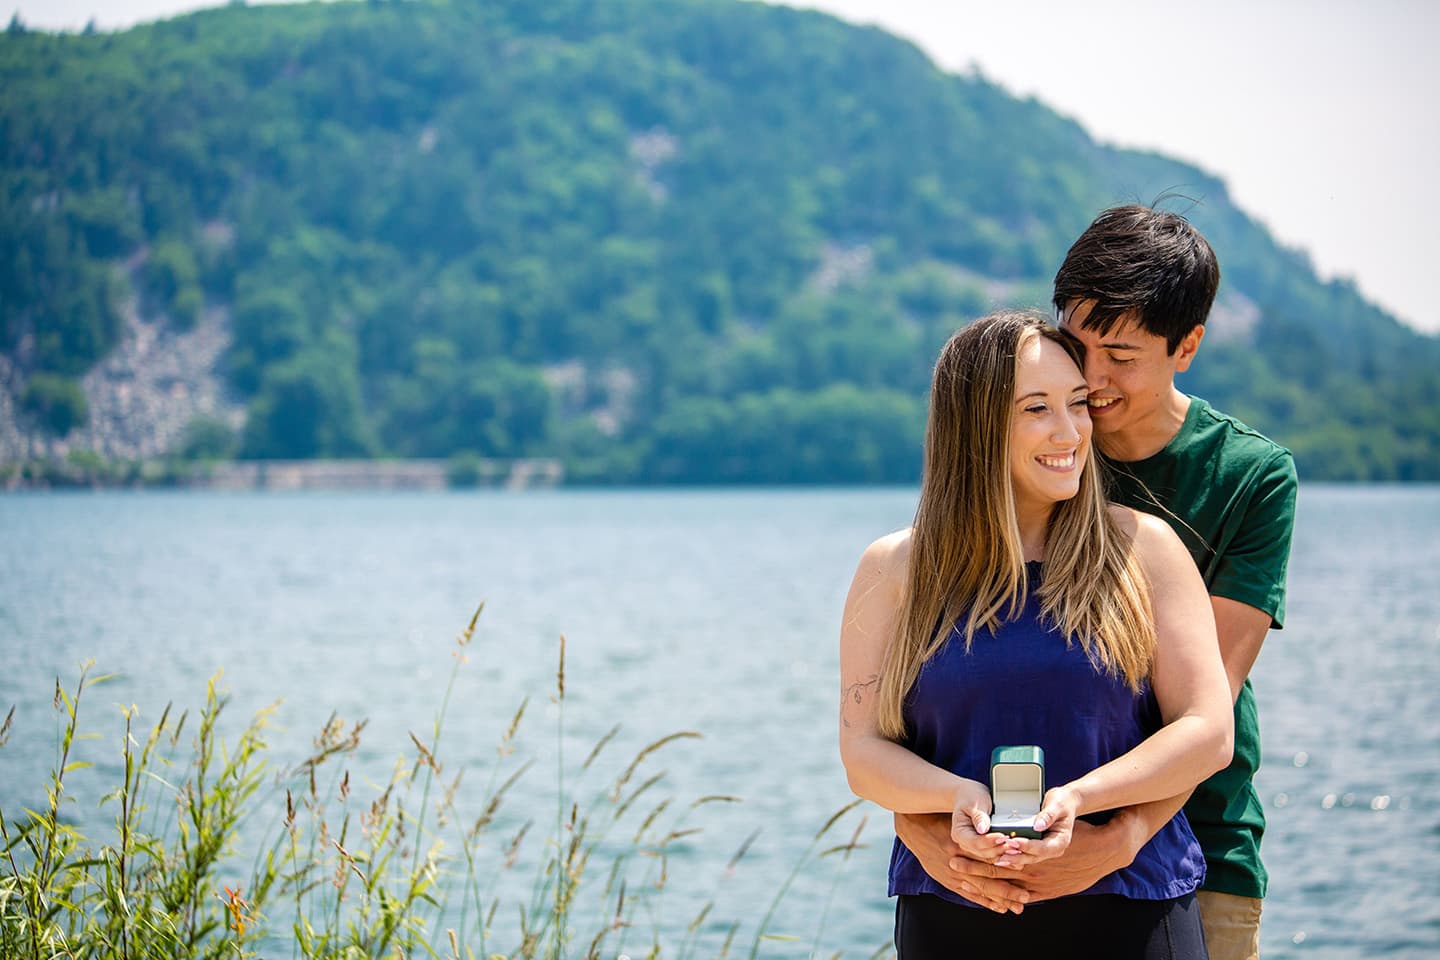 Gary and Natalie embracing in front of a lake. Natalie is holding her wedding ring.